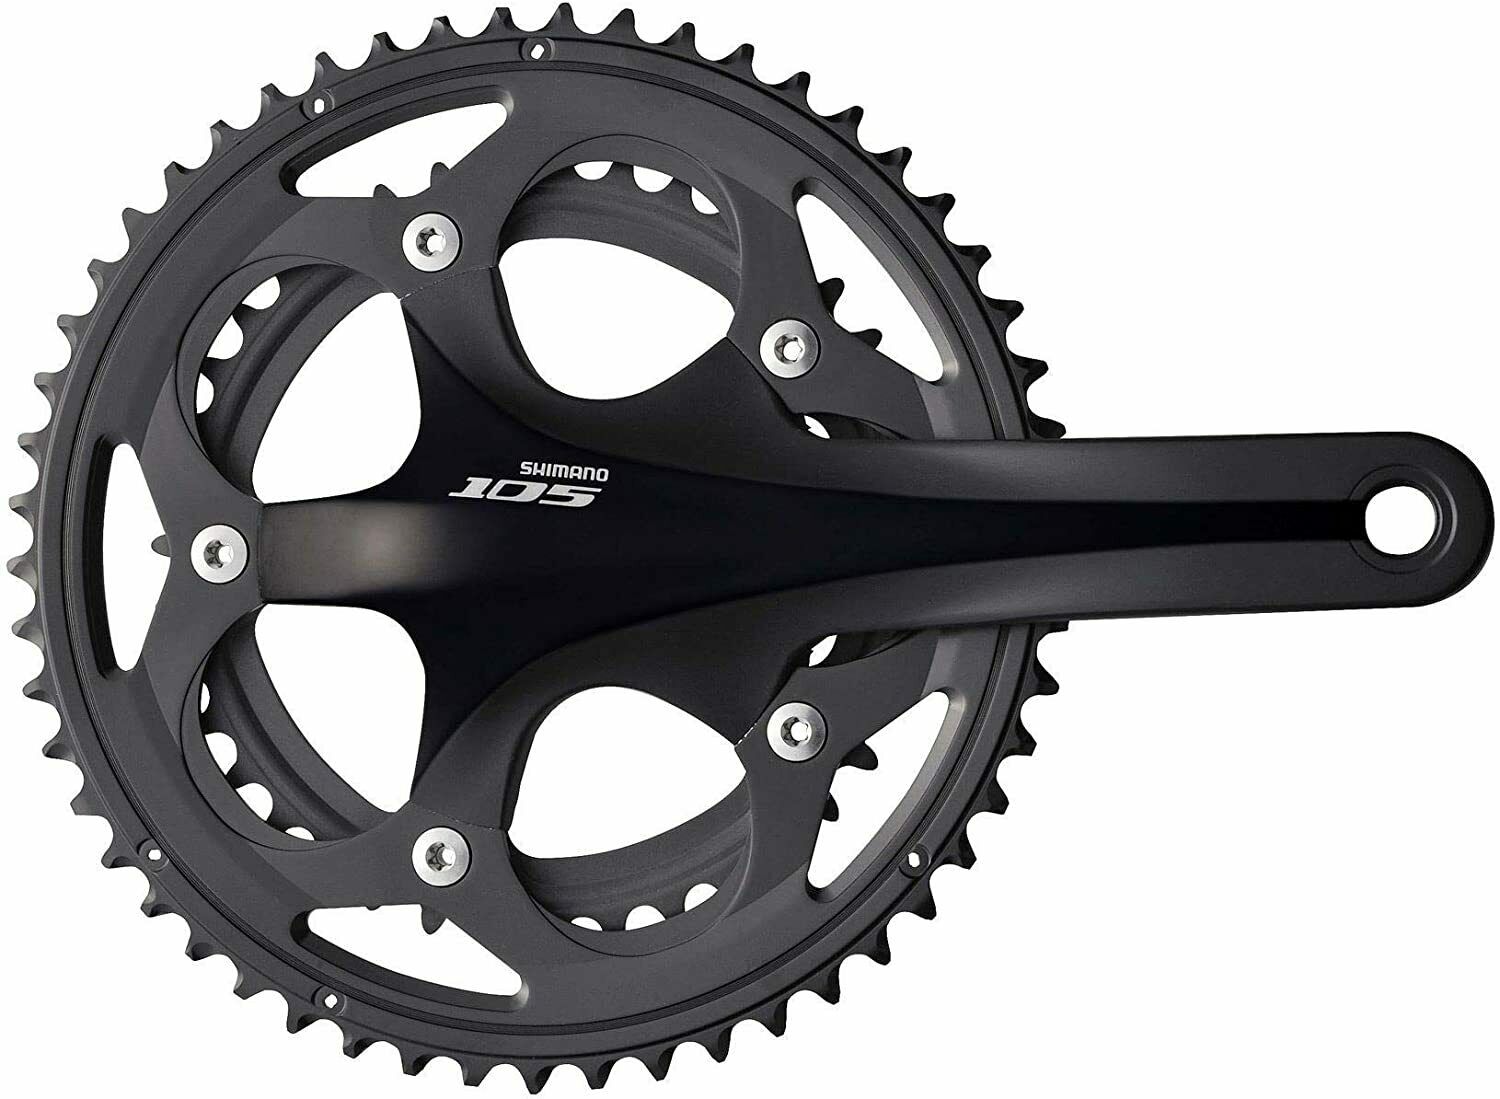 Shimano 105 FC-5750 10 Speed Compact Chainset - 50/34T - 170mm Arm - B